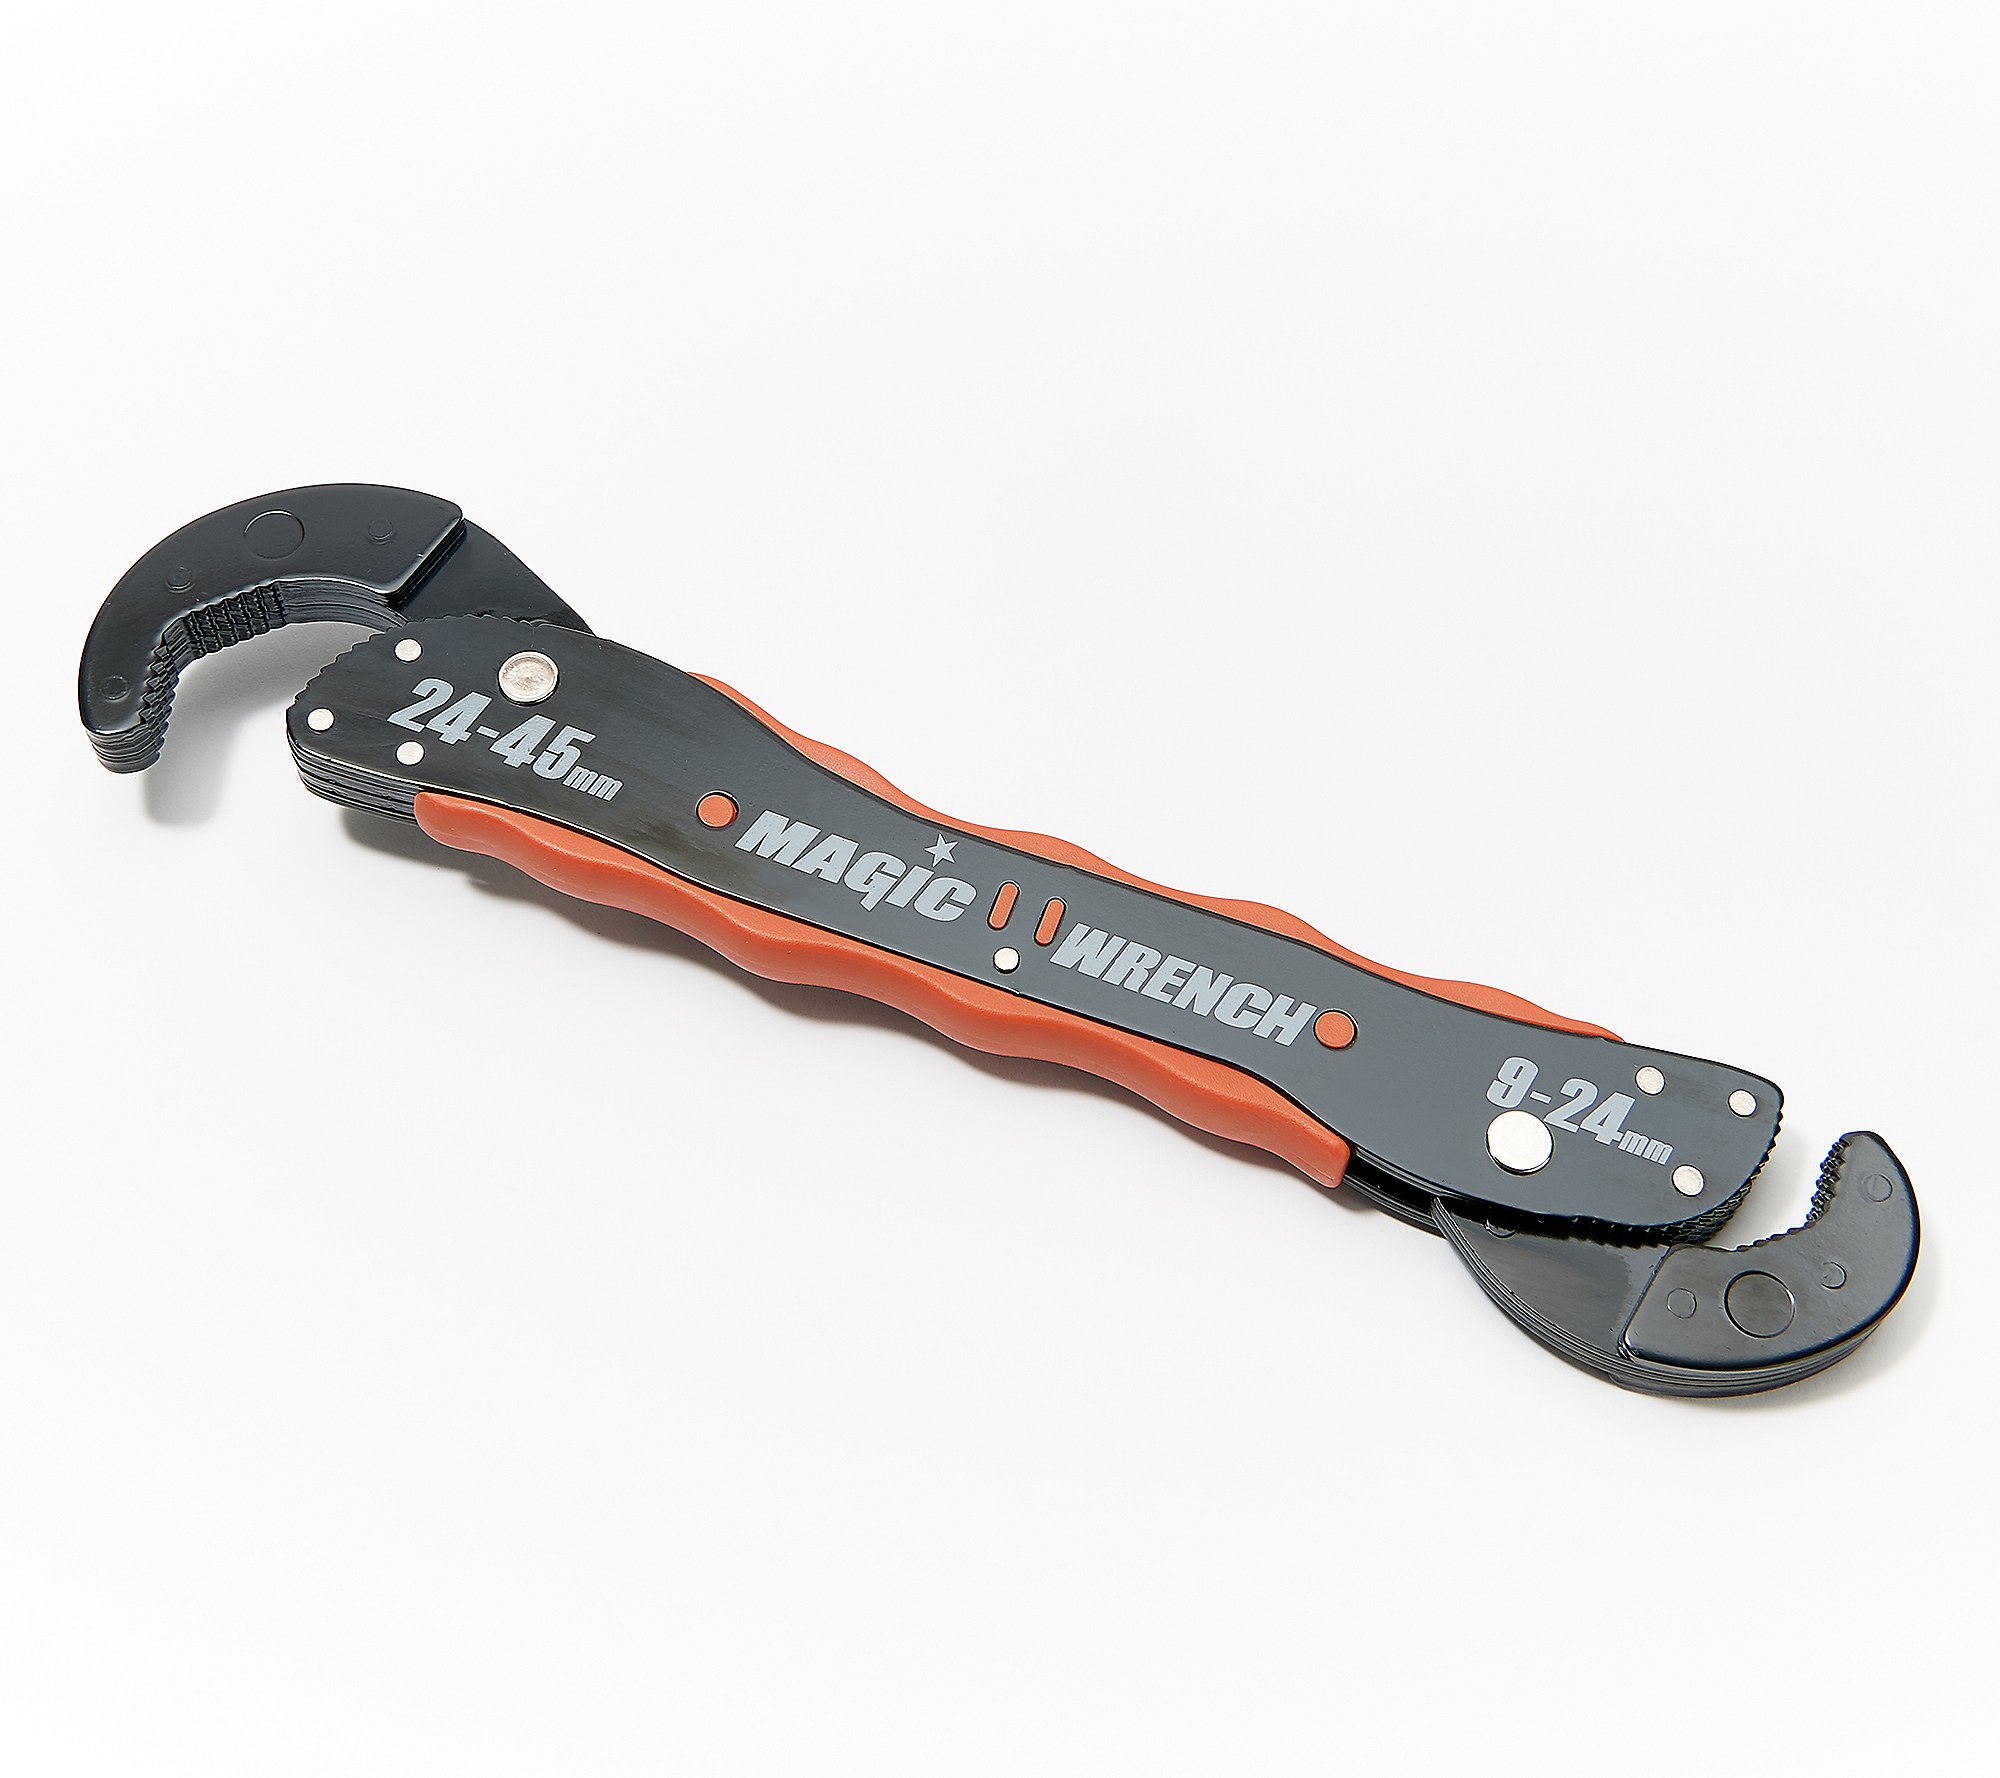 Yadianna Adjustable Wrench Metal Multi-Function Wrench Repair Tool